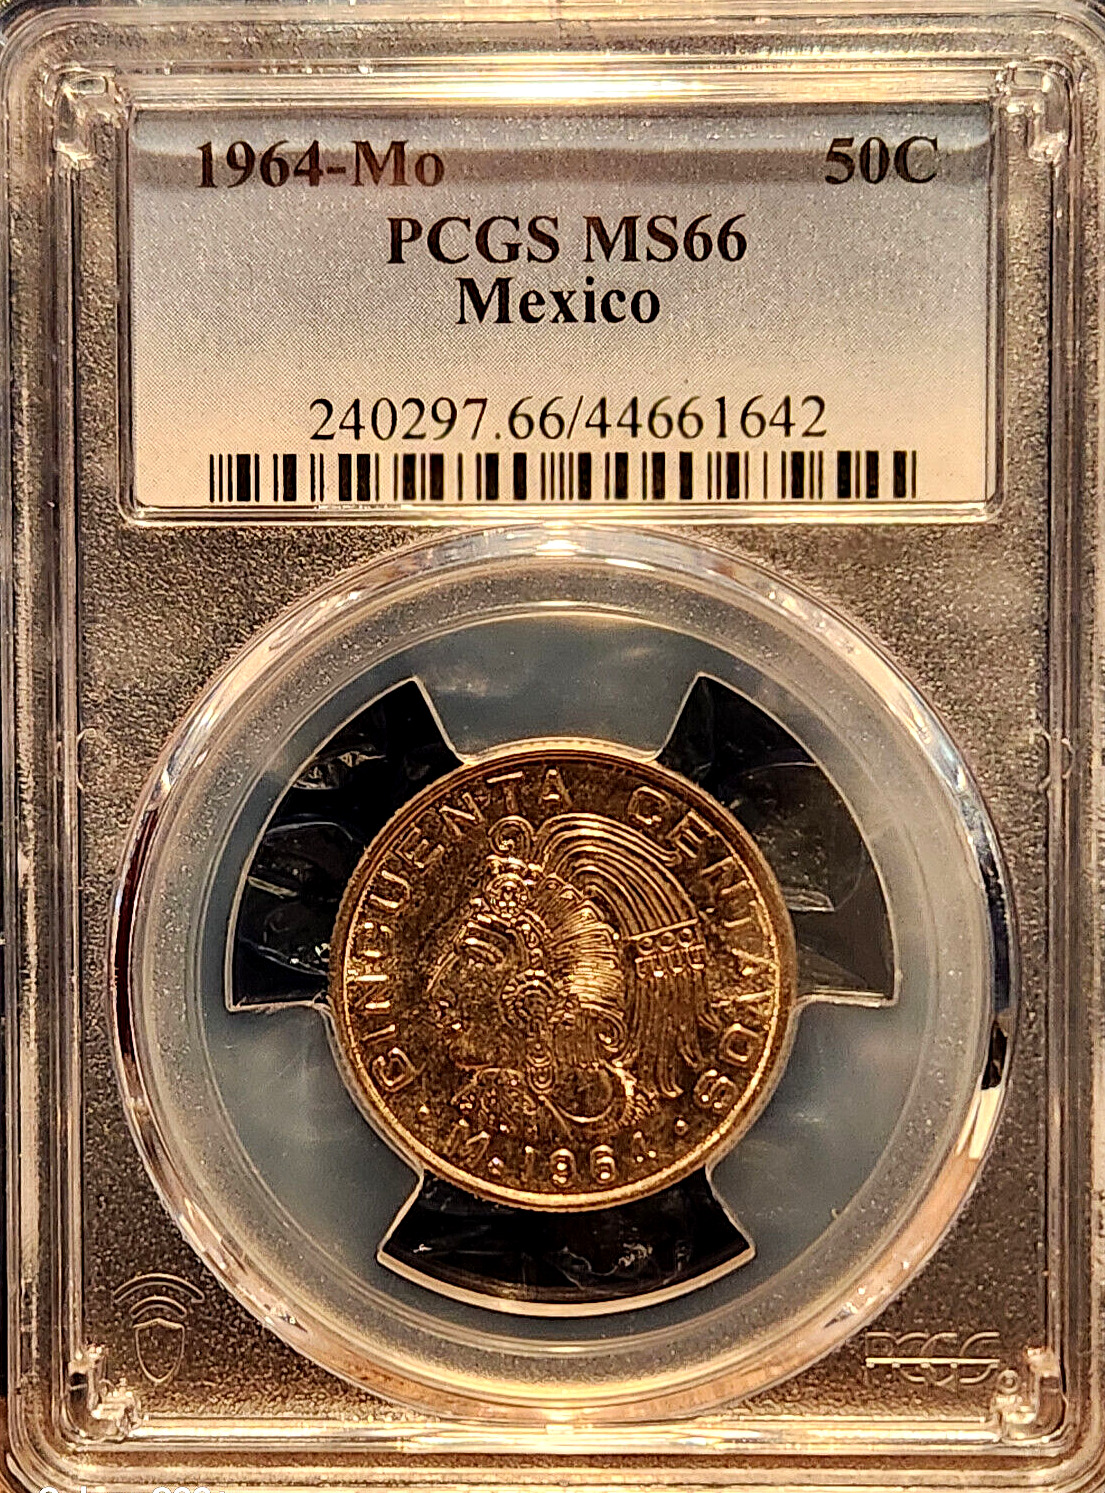 SPECIAL PRICED--1964-Mo PCGS MS66 MEXICO 50c COIN KM#451-by the CASE DISCOUNTS